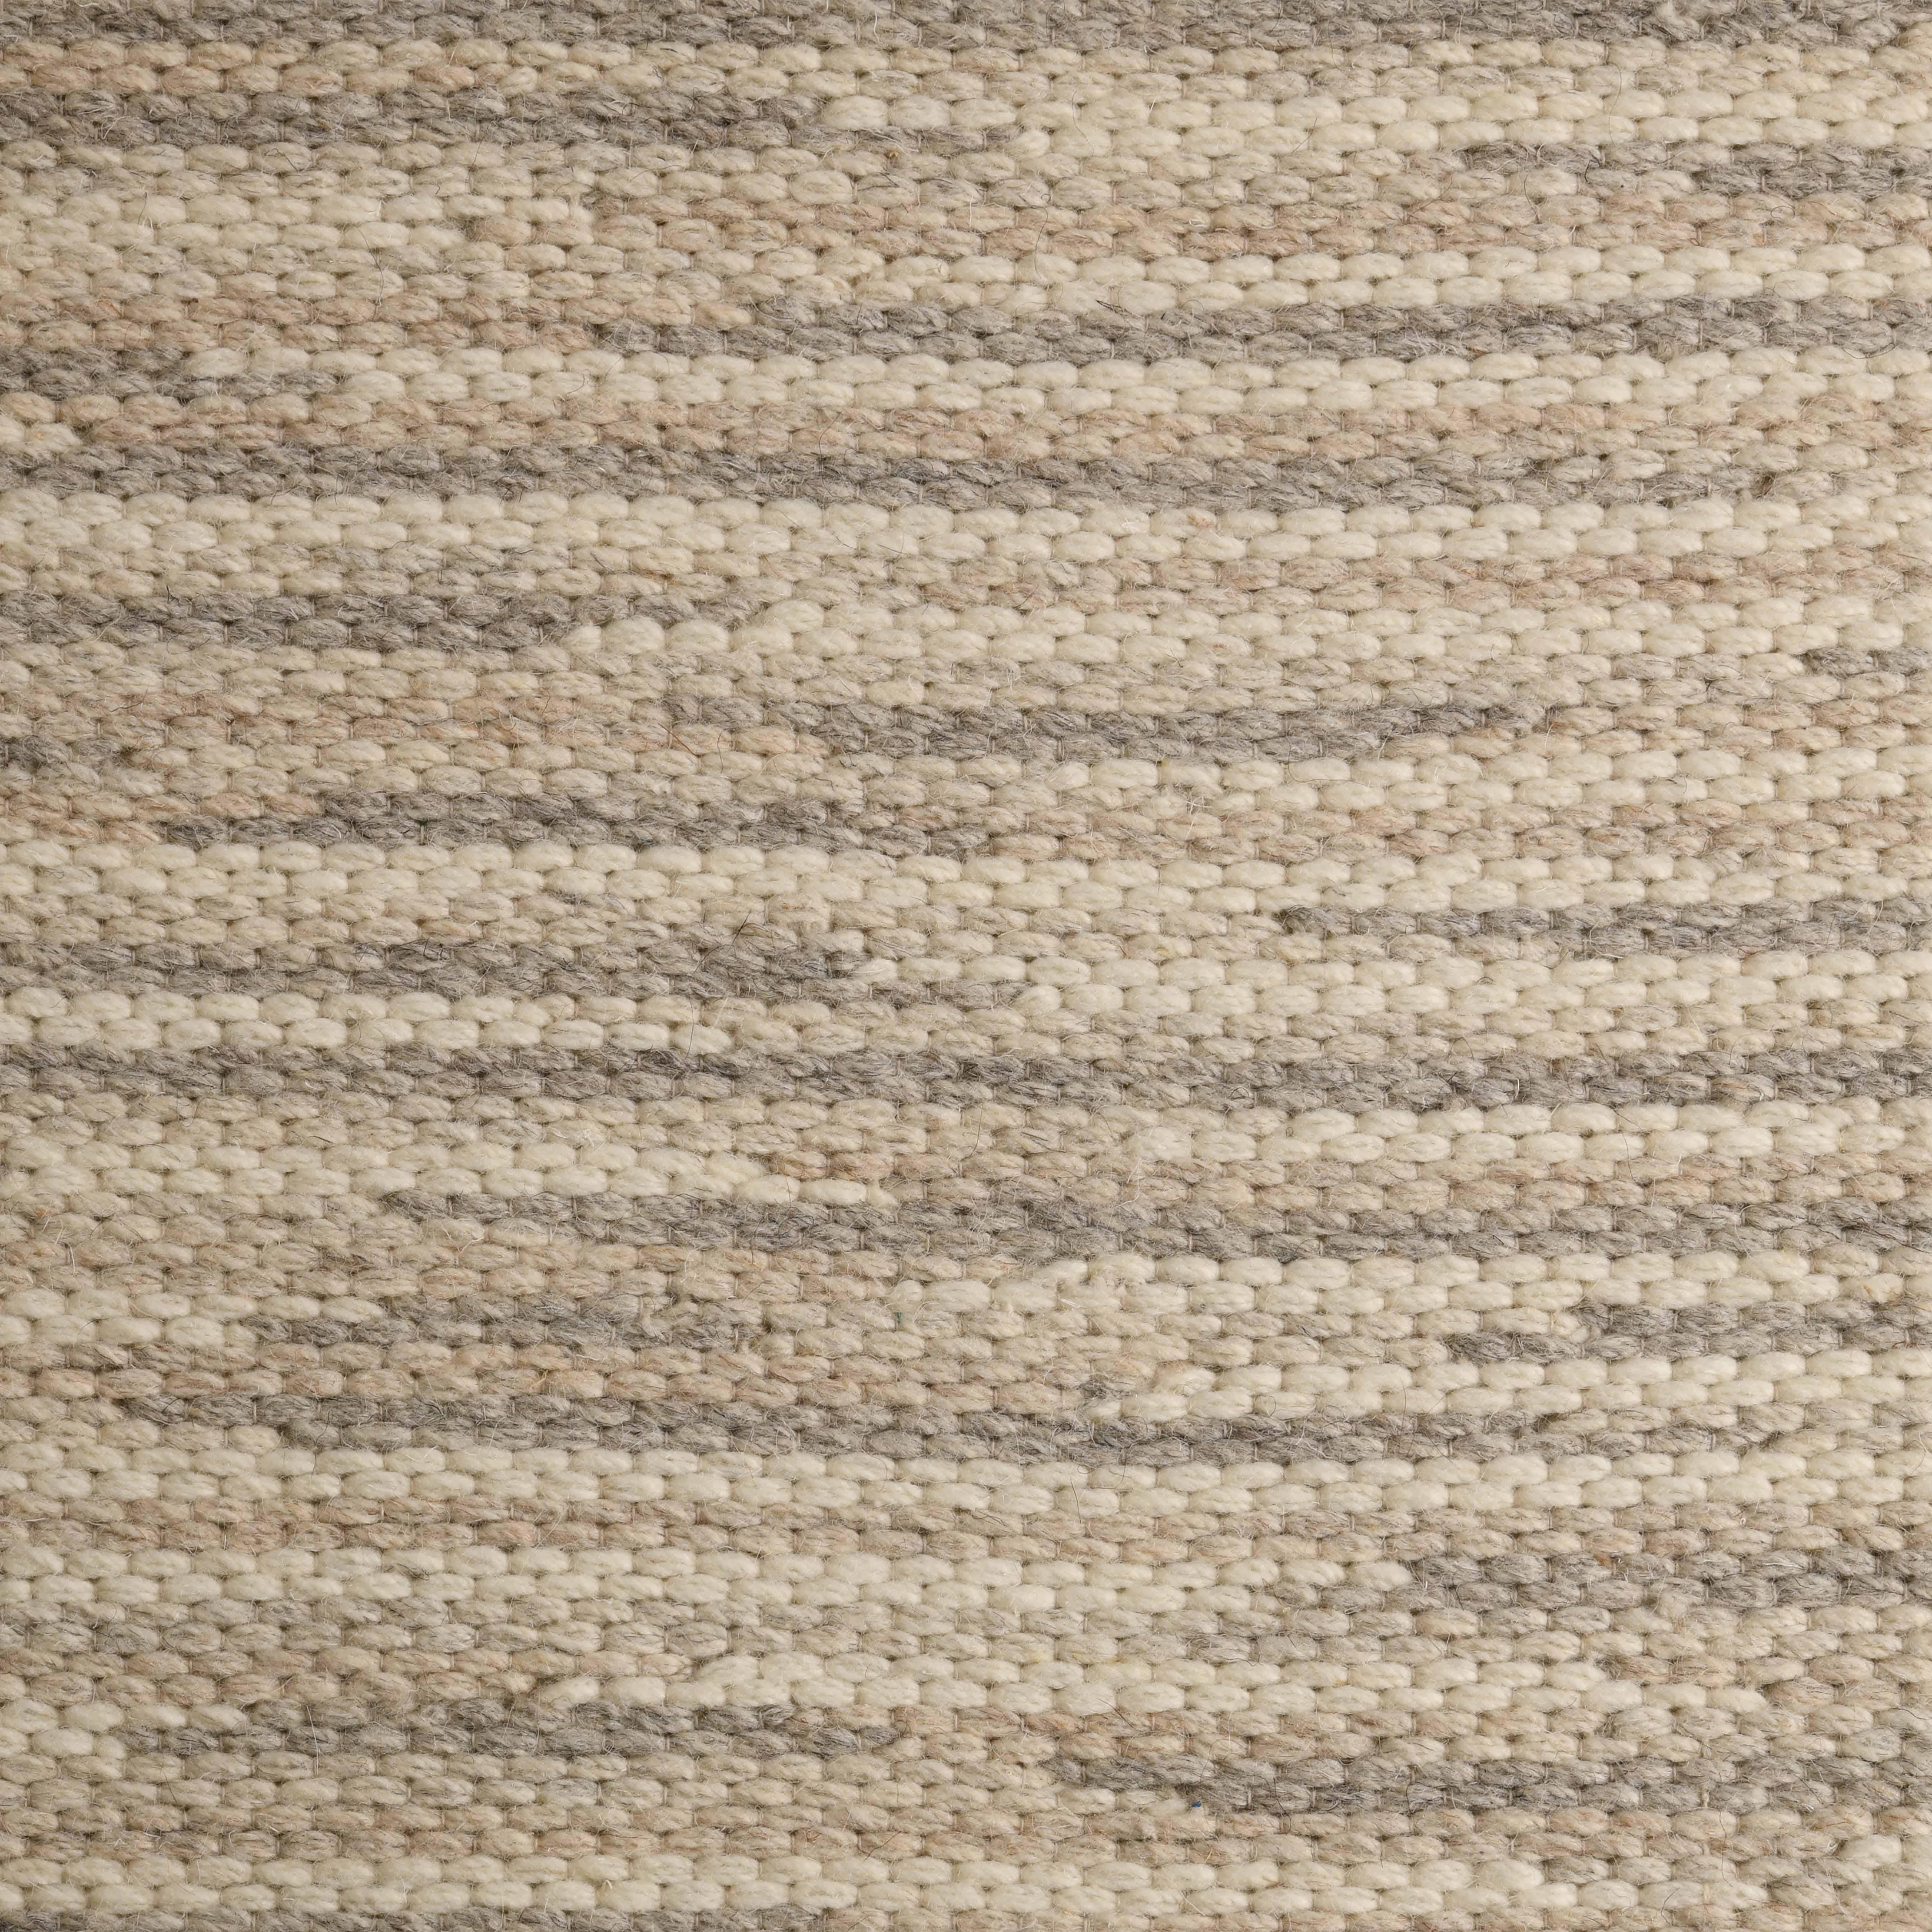 Rivus, Stone, Handwoven Face 60% Undyed NZ Wool, 40% Undyed MED Wool, 6' x 9' For Sale